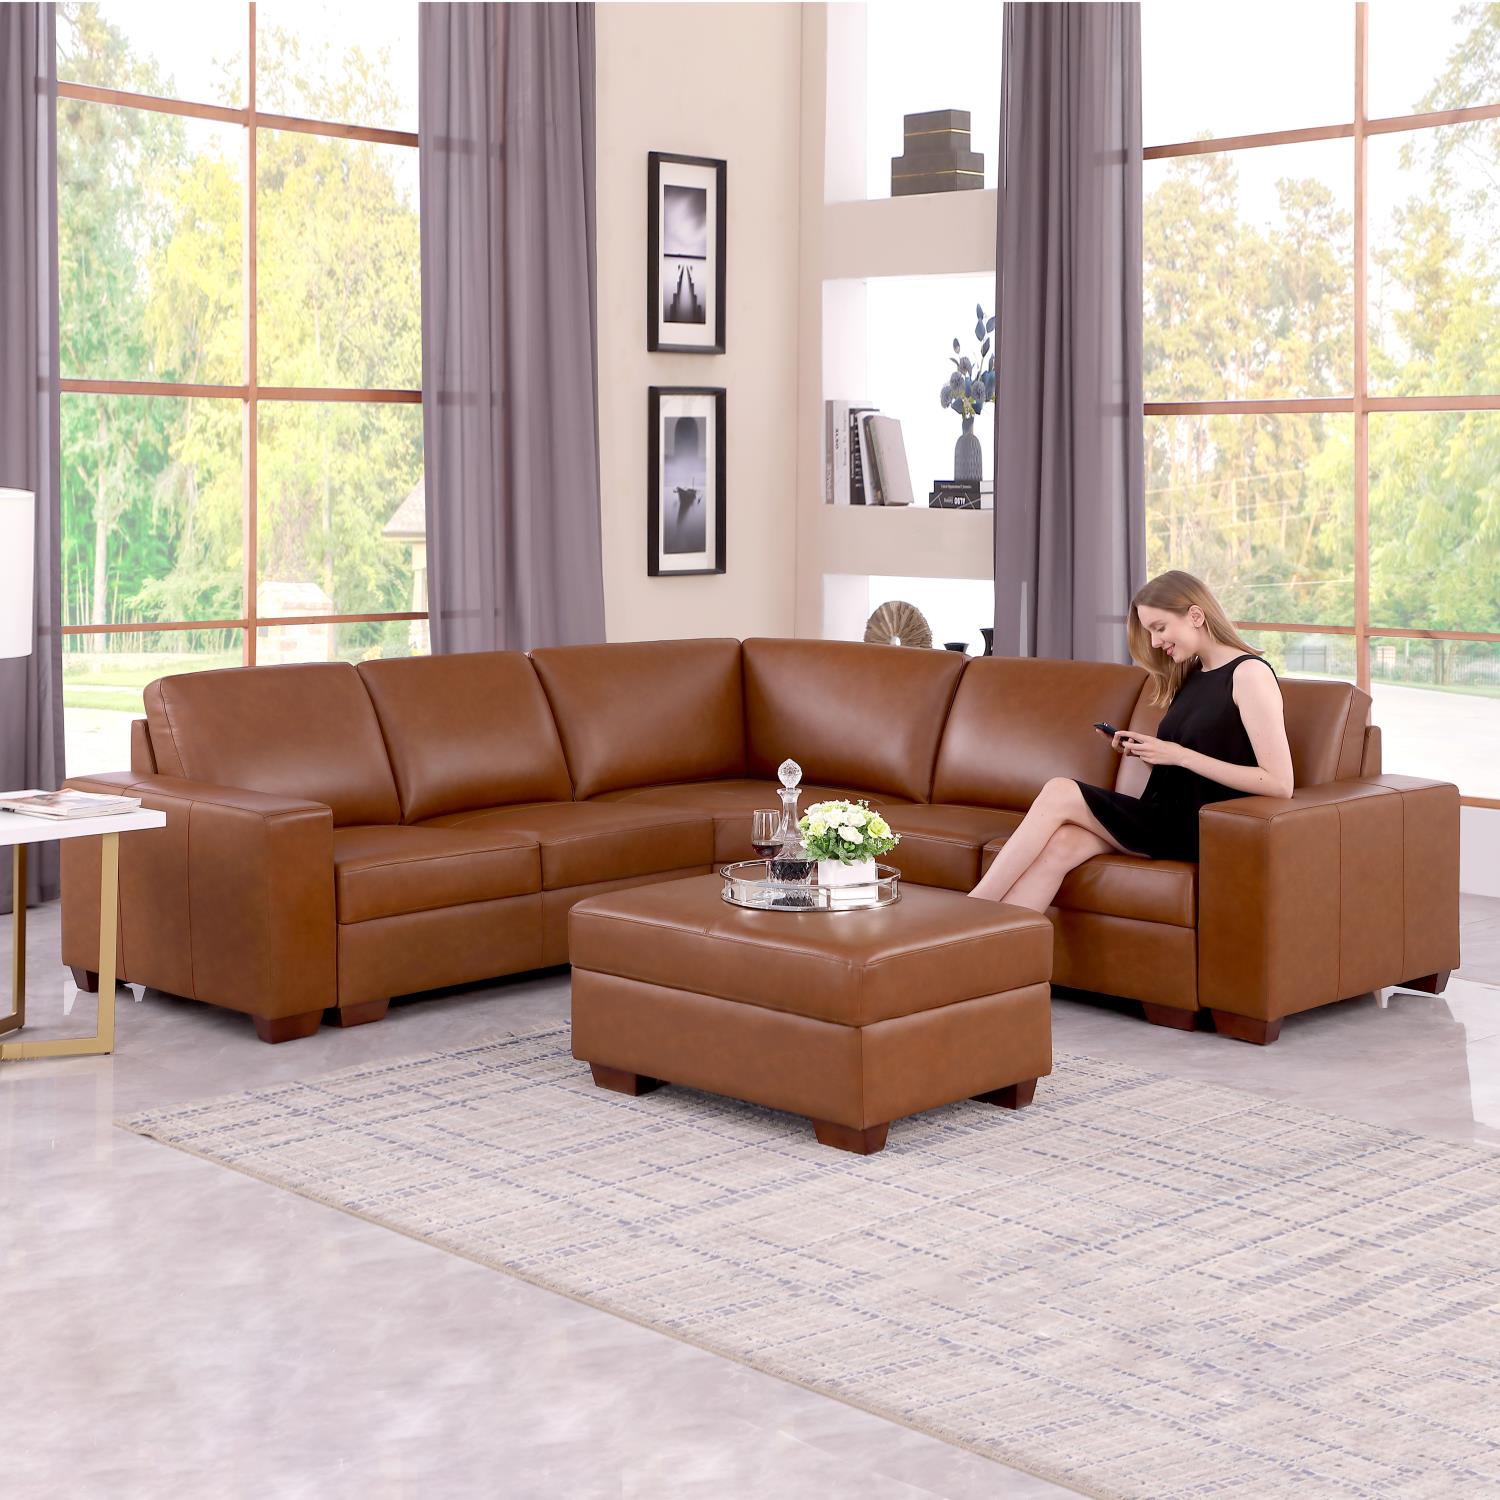 Ainehome Brown Top Cowhide 5 Position Sofa and Chair Set